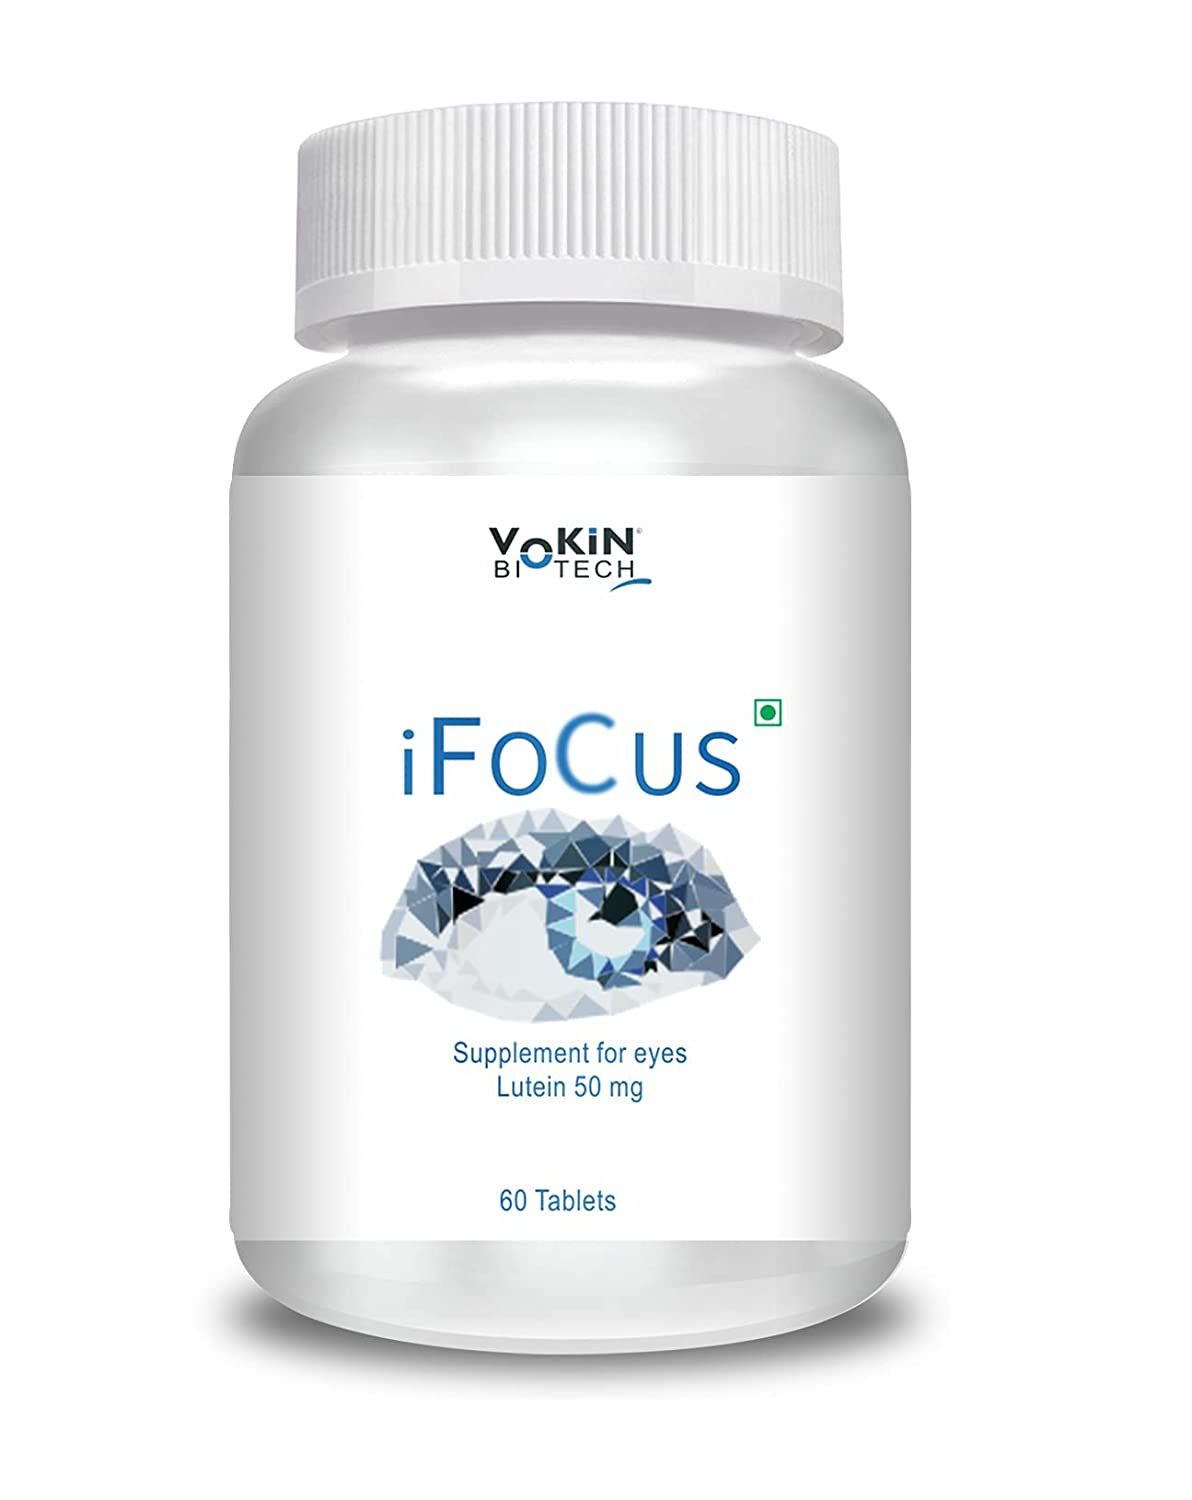 Vokin Biotech iFocus Natural Eye Care Supplement Image